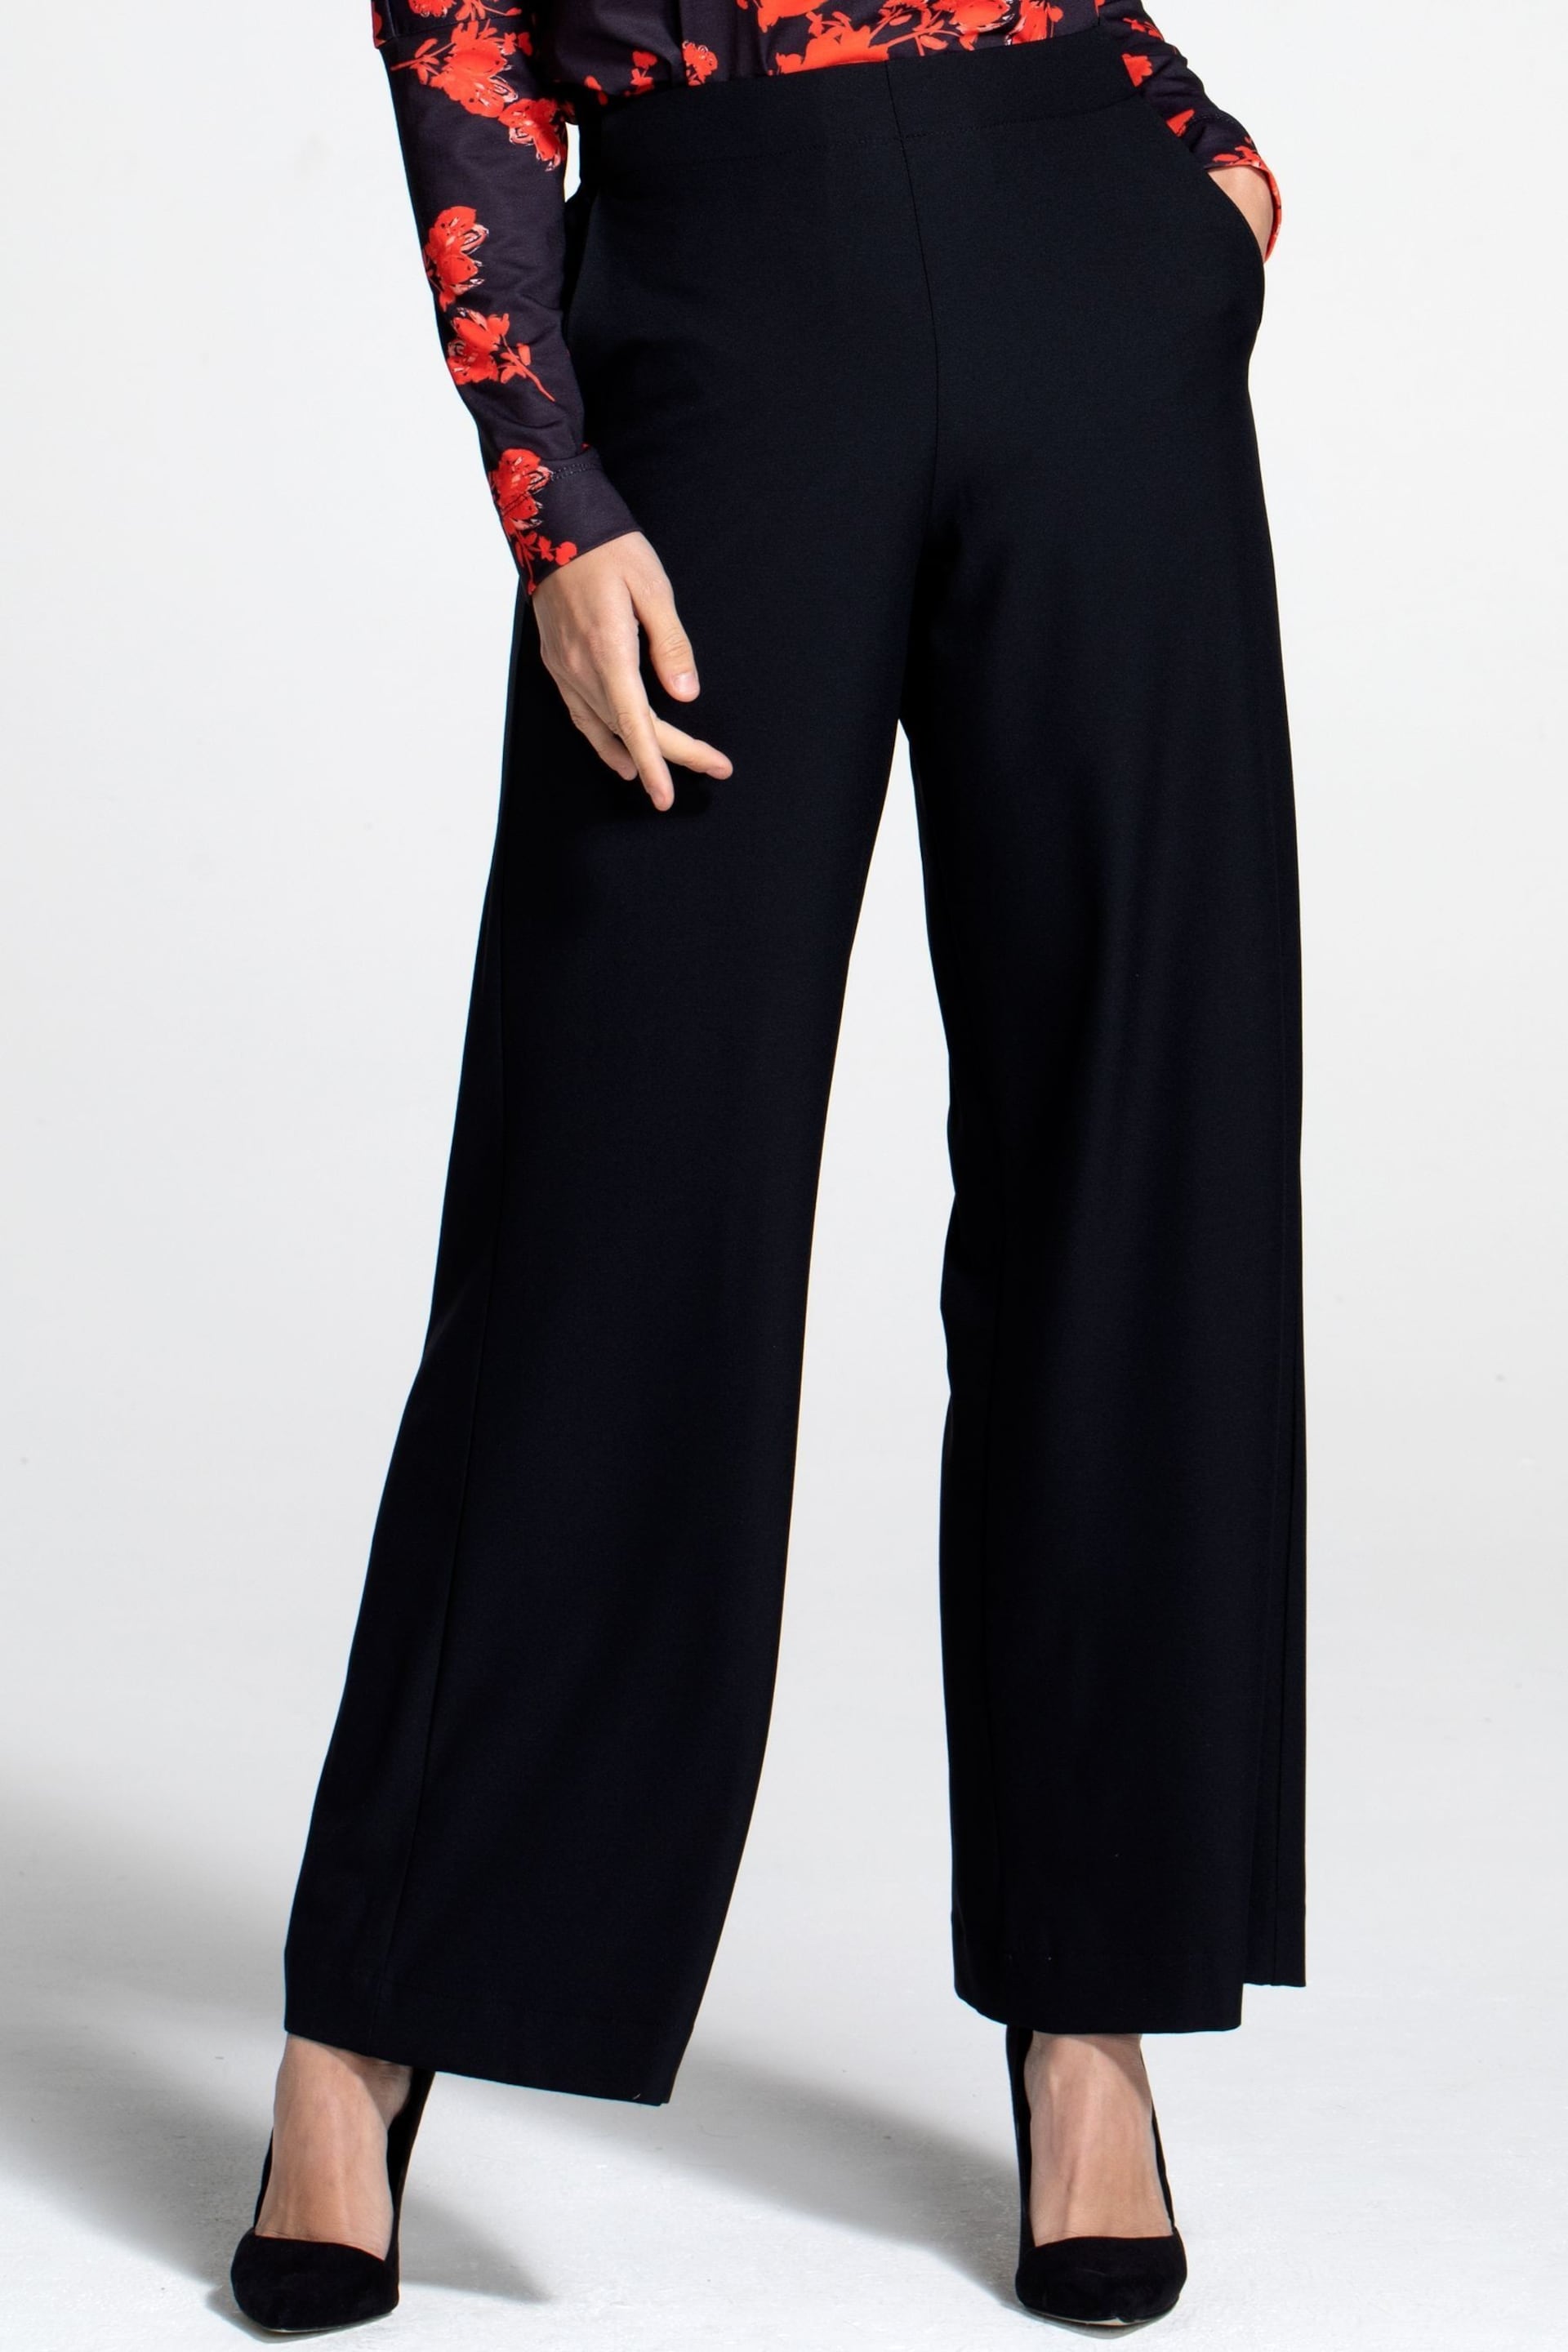 HotSquash Black Luxe-Lounge Wide Leg Crepe Trousers - Image 1 of 4